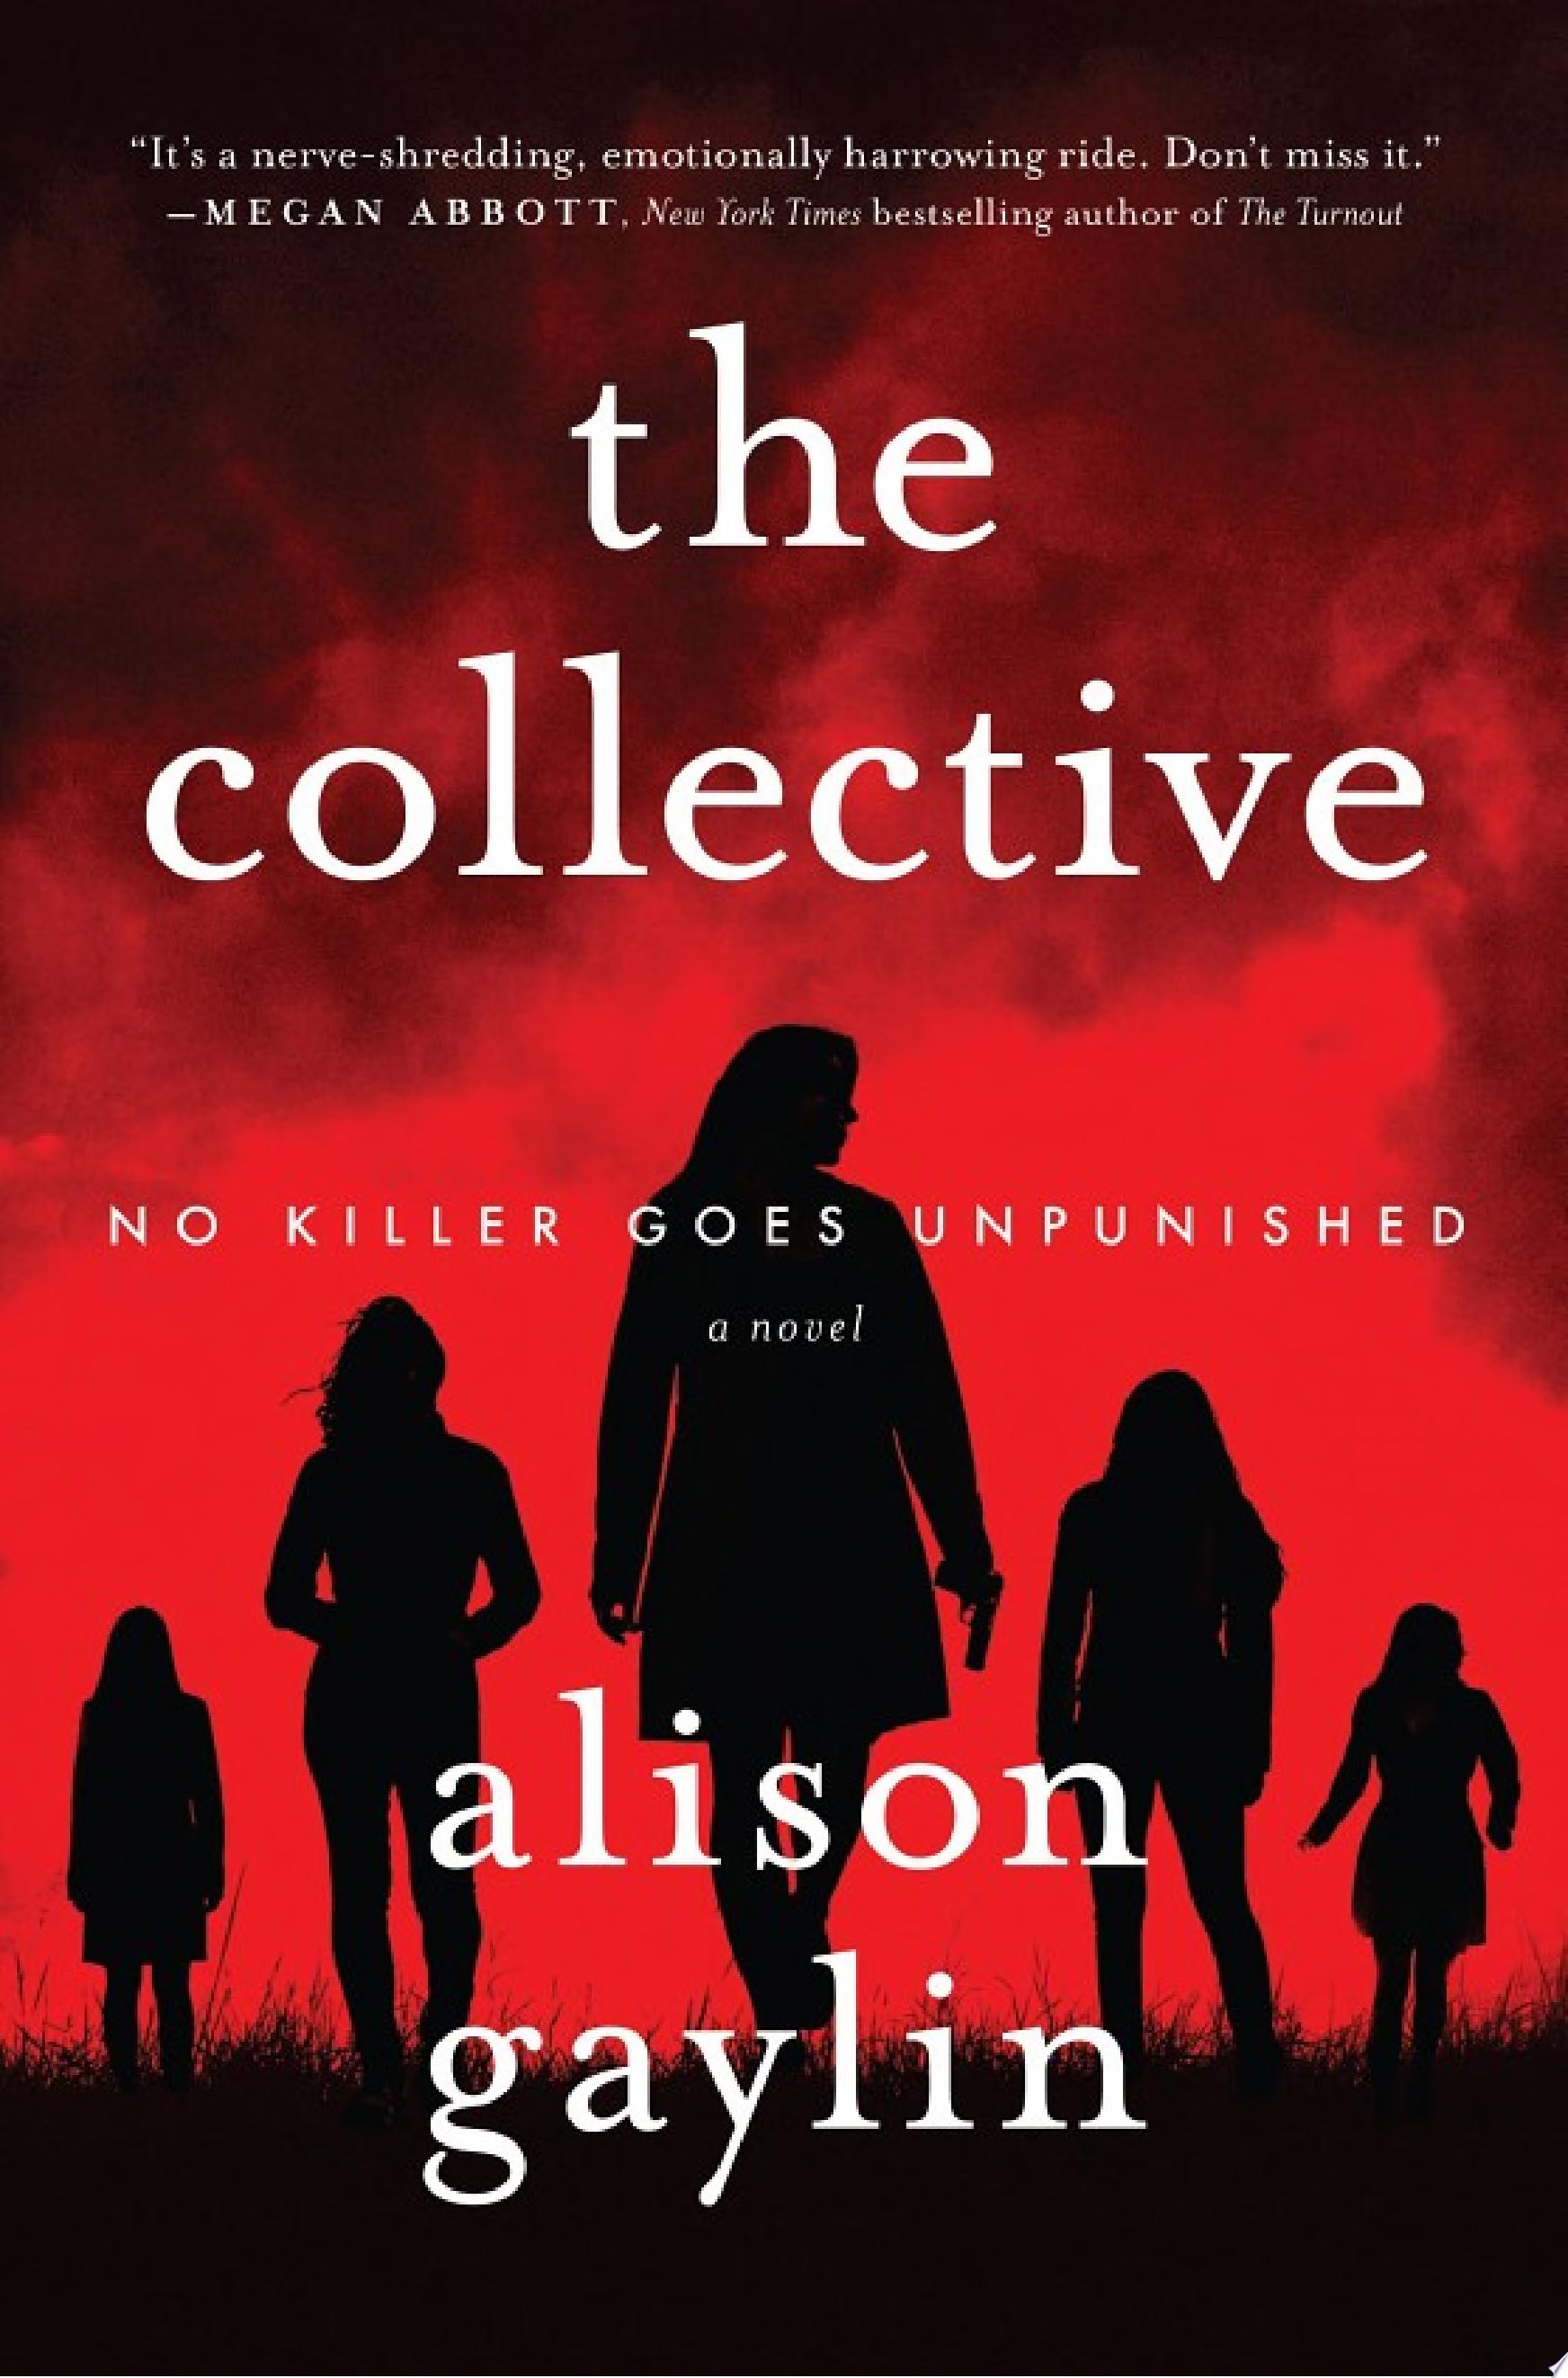 Image for "The Collective"